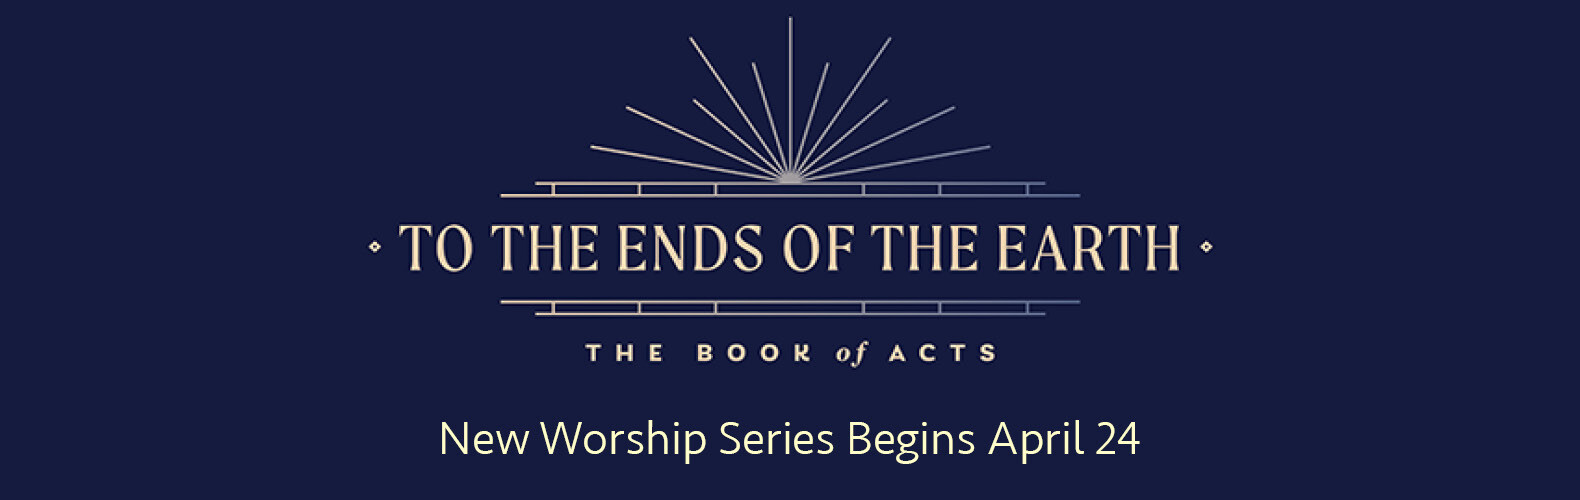 To The Ends of the Earth Worship Series